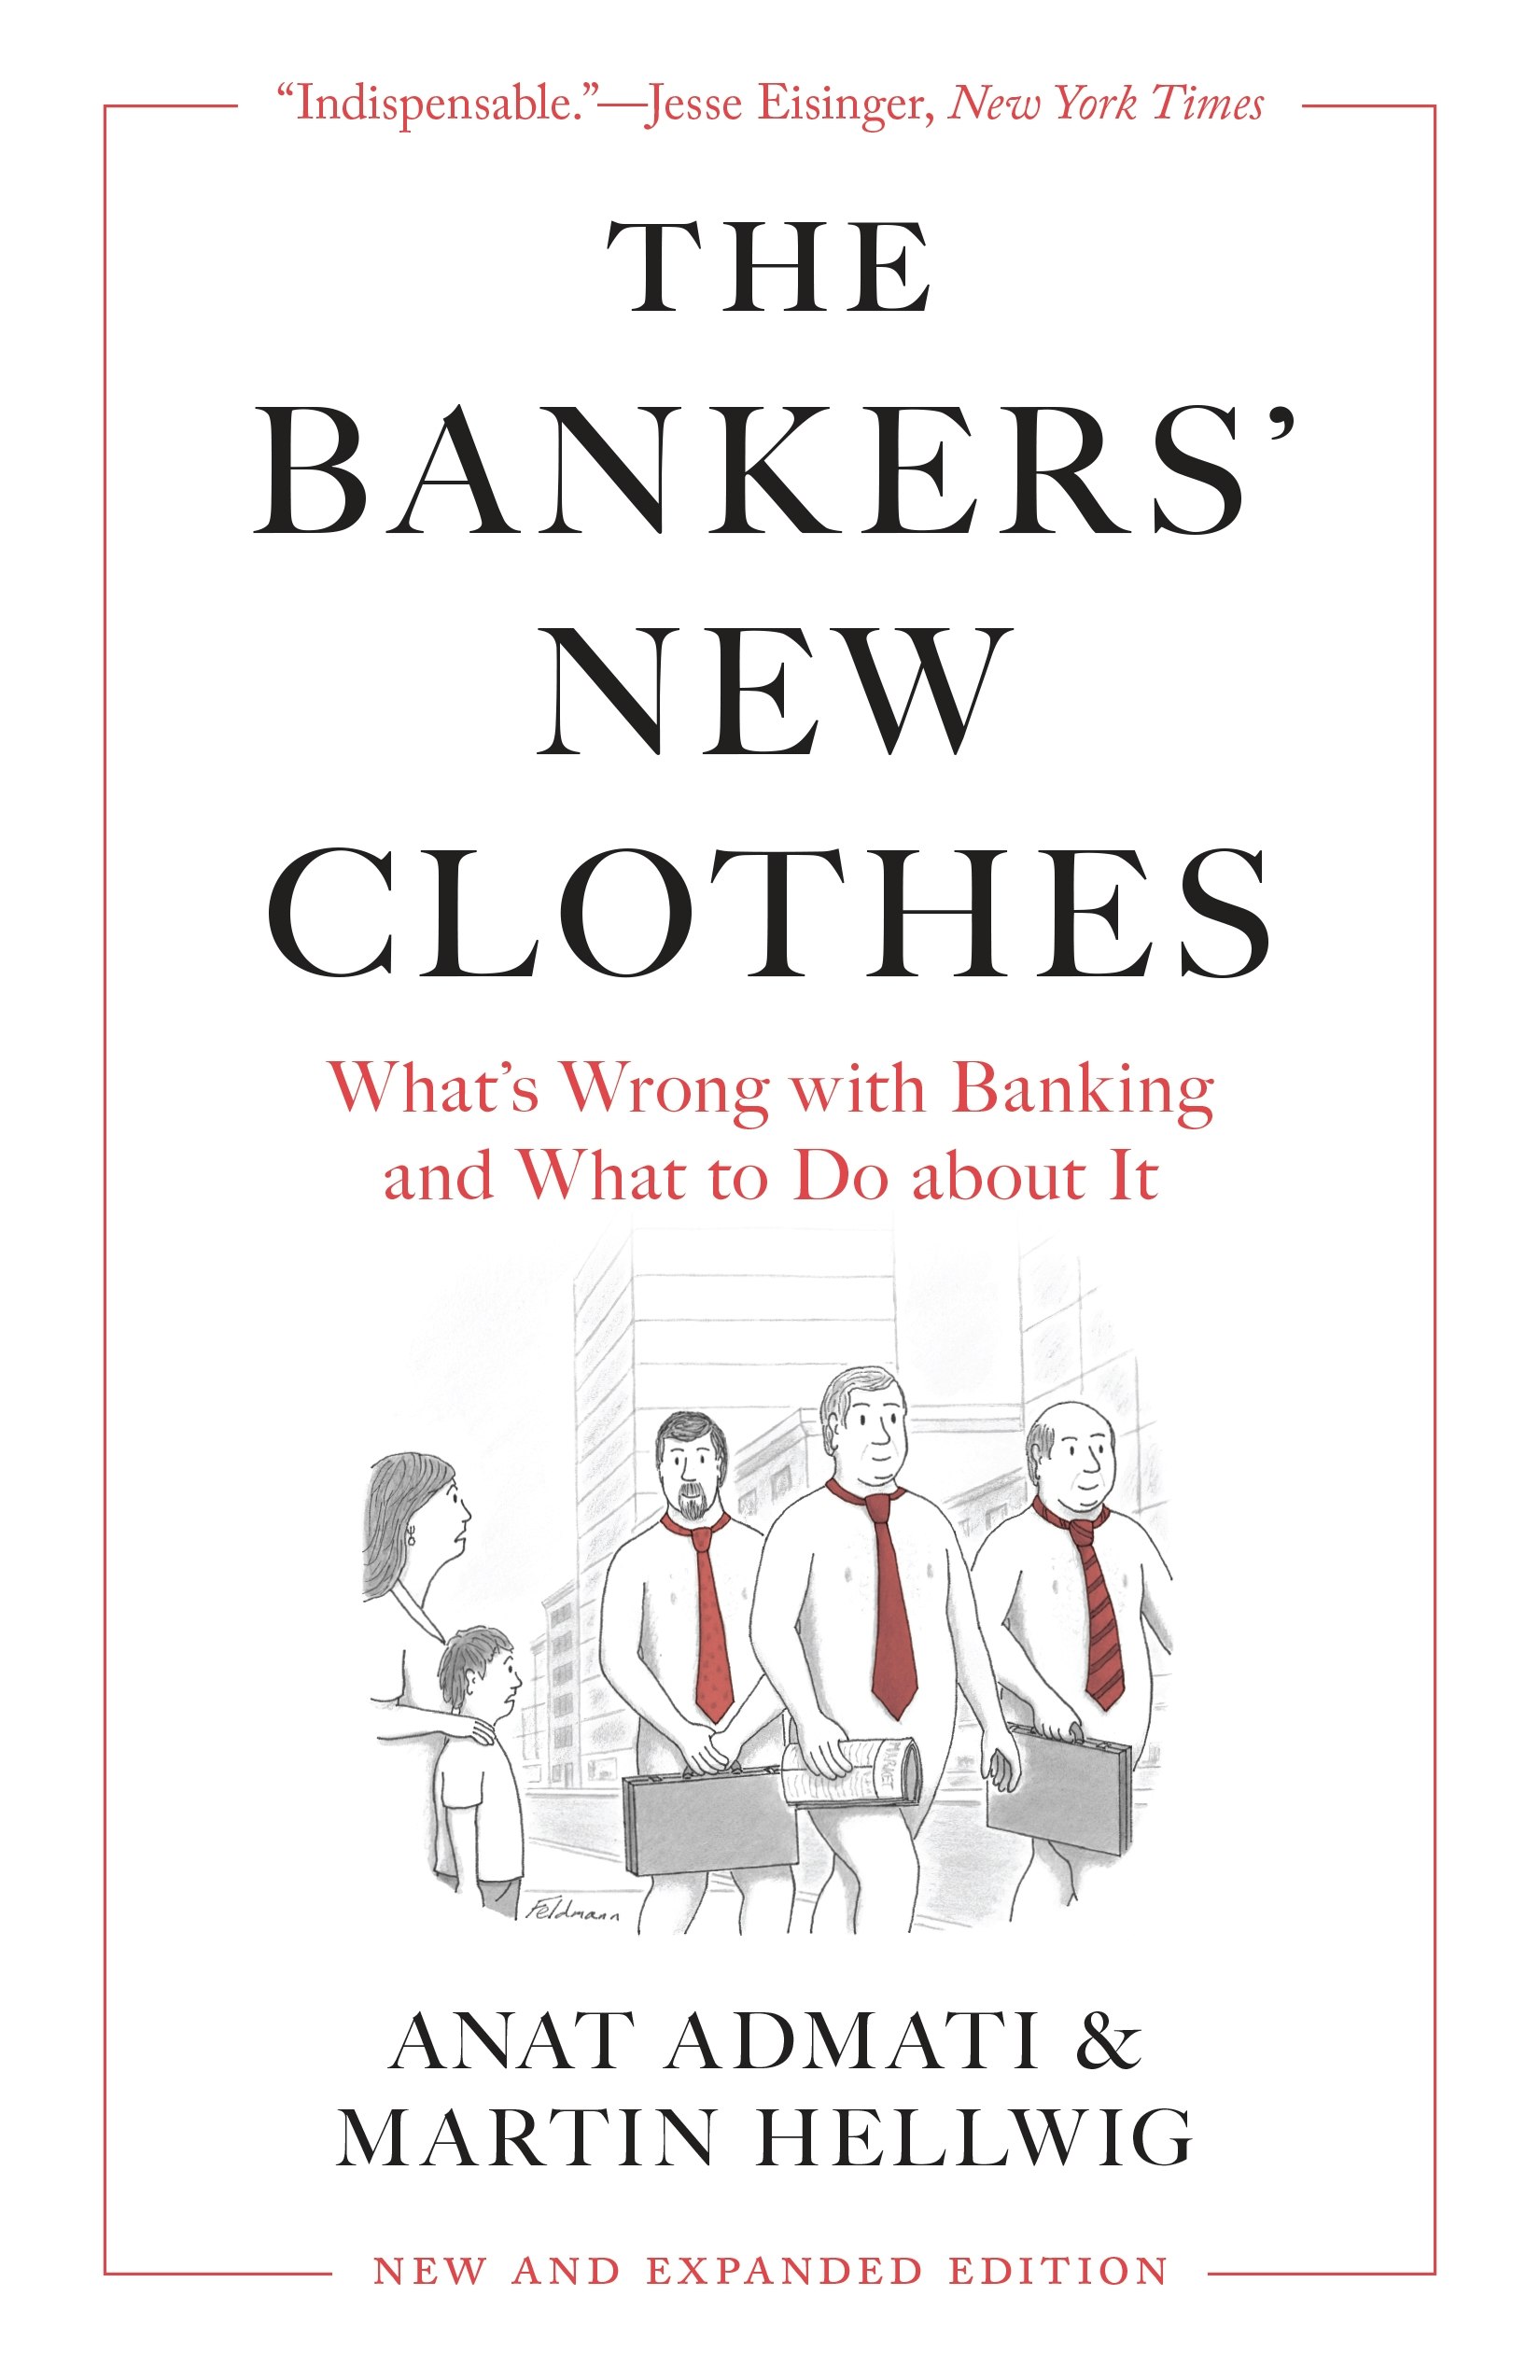 The　Bankers'　Press　Princeton　New　Clothes　University